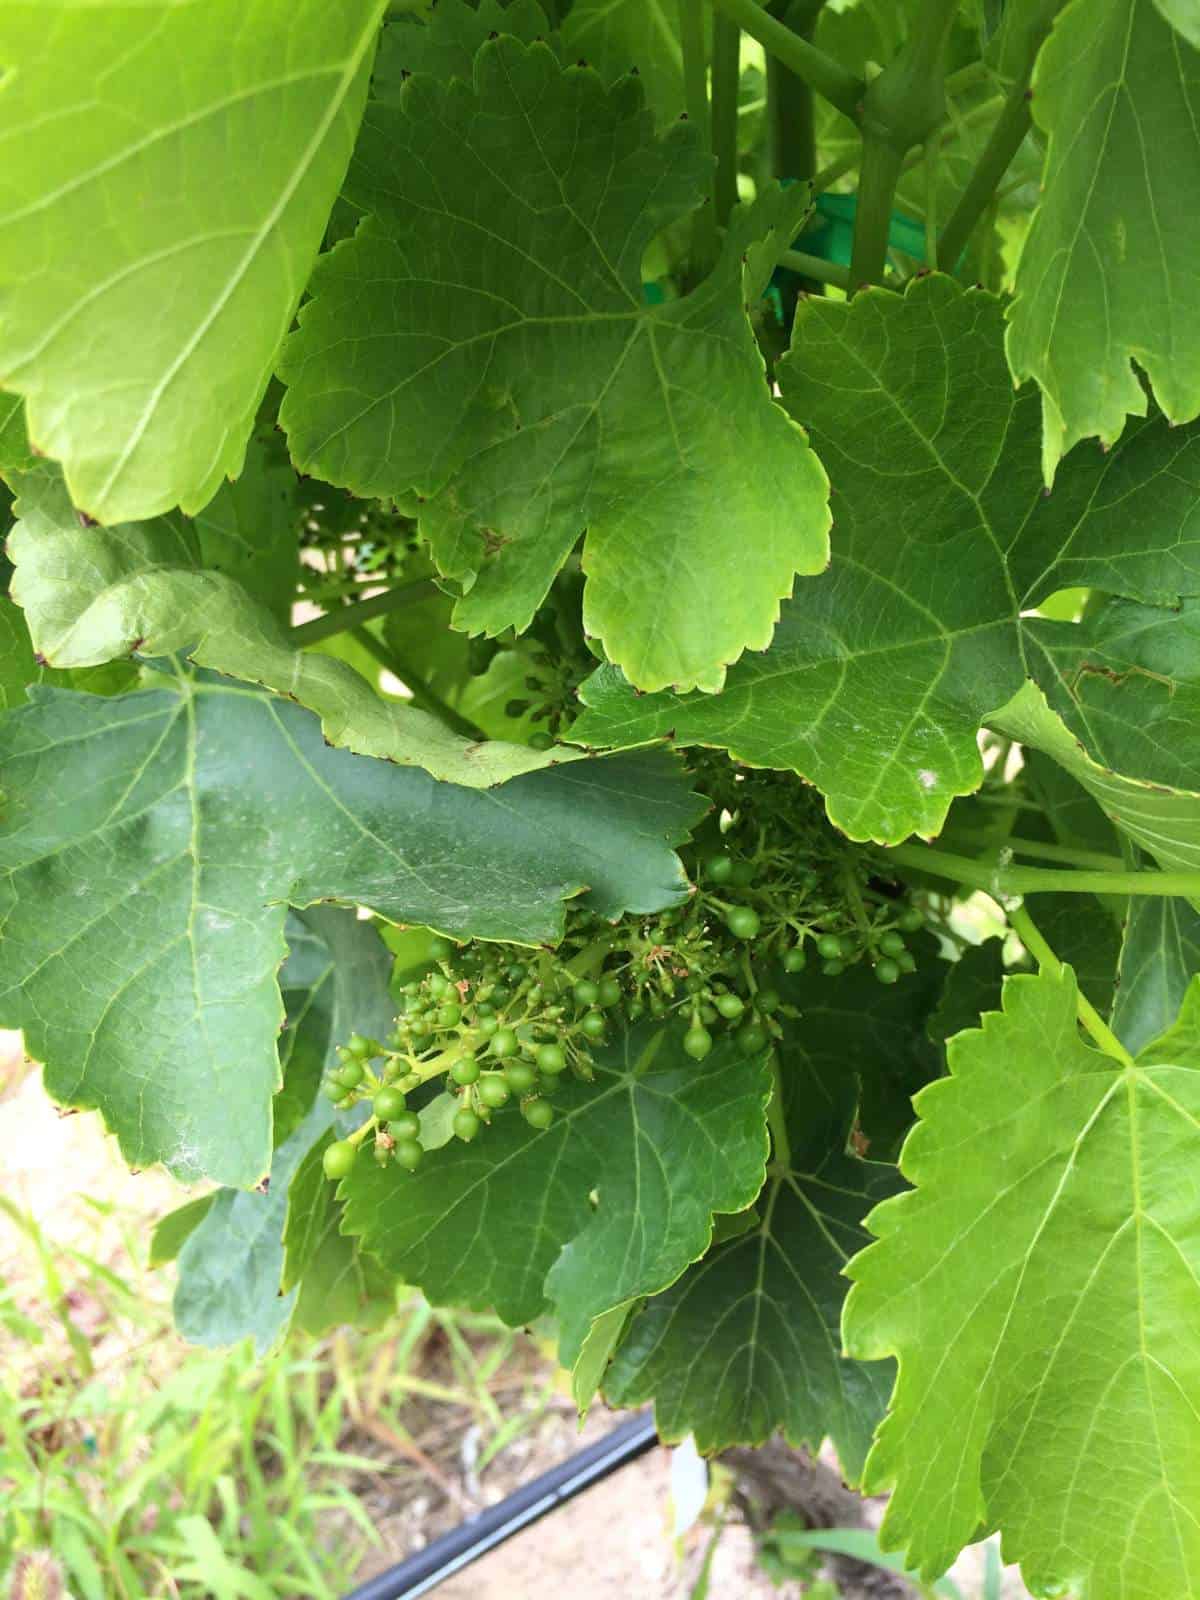 grapes starting to grow amidst grape vine leaves.